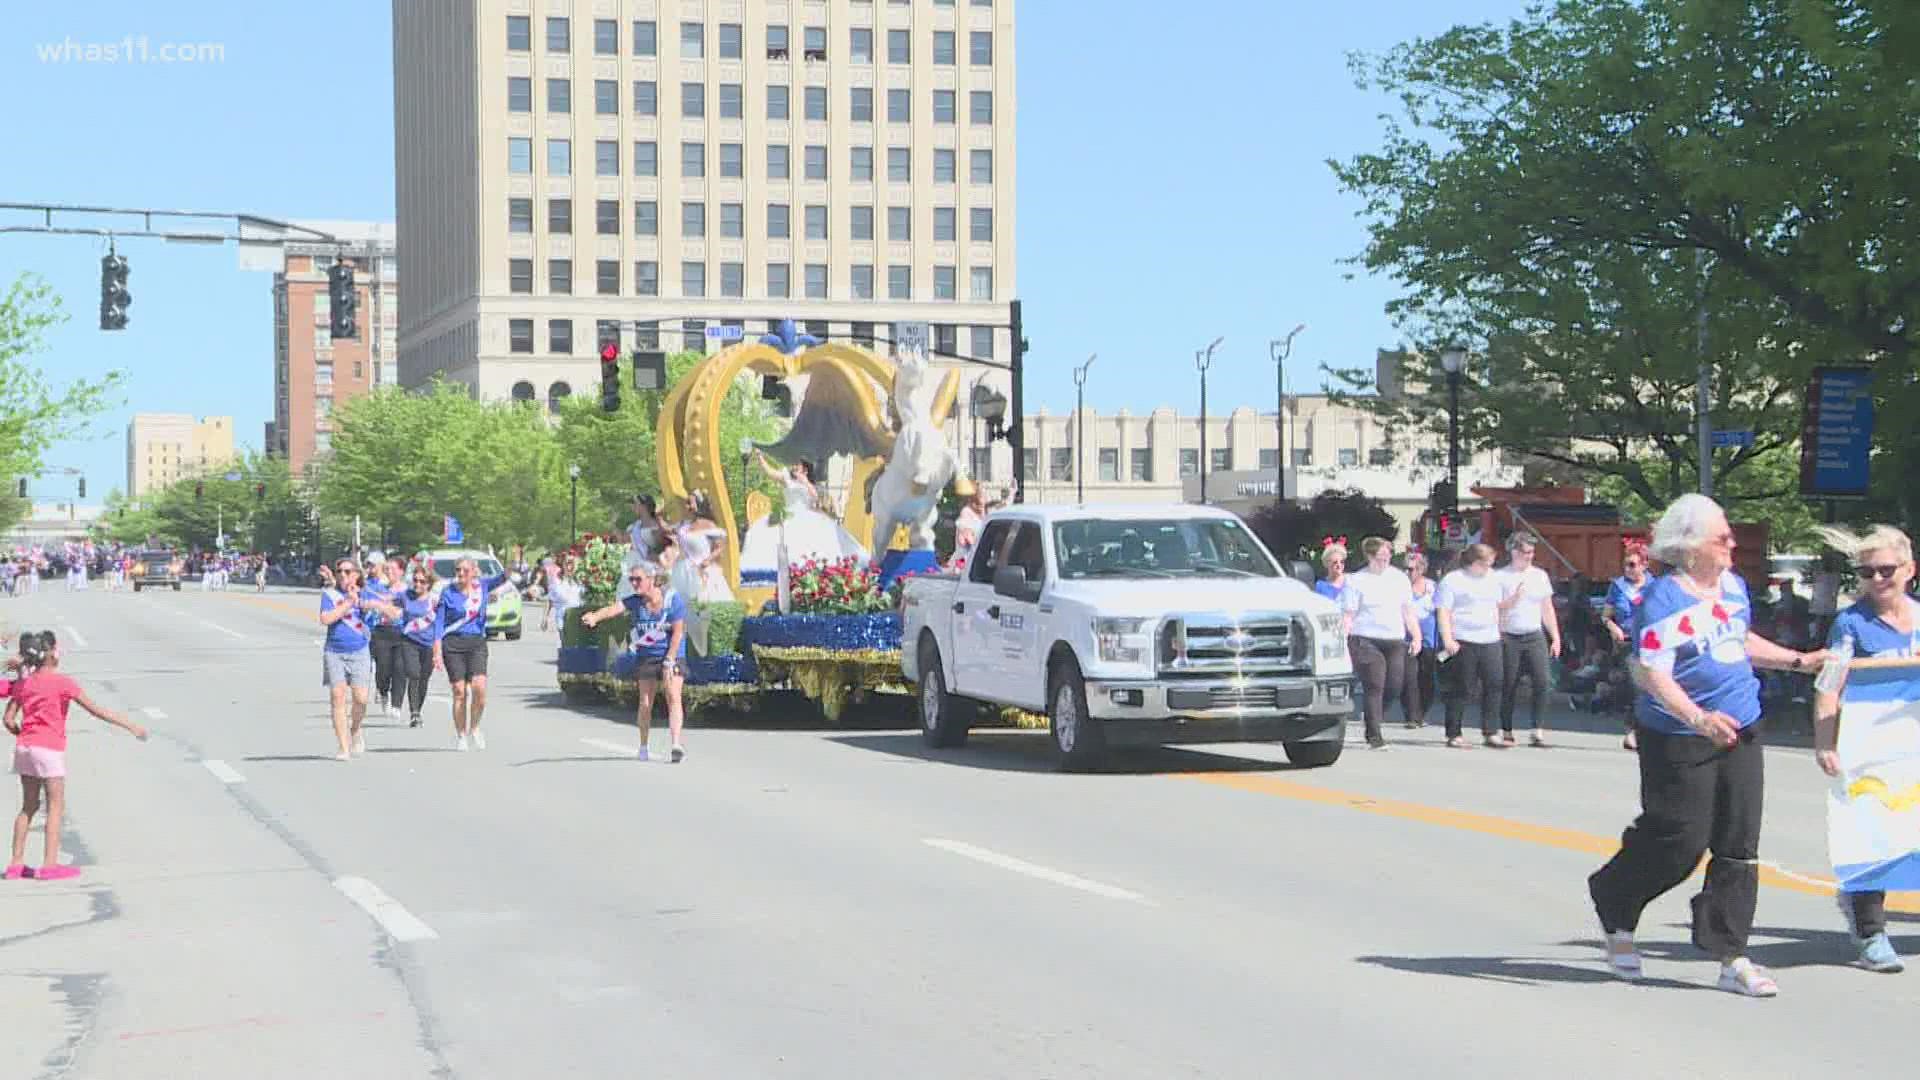 For the first time in history, the Pegasus Parade was held on a Sunday, bringing many from across the community to enjoy the full pomp and circumstance.